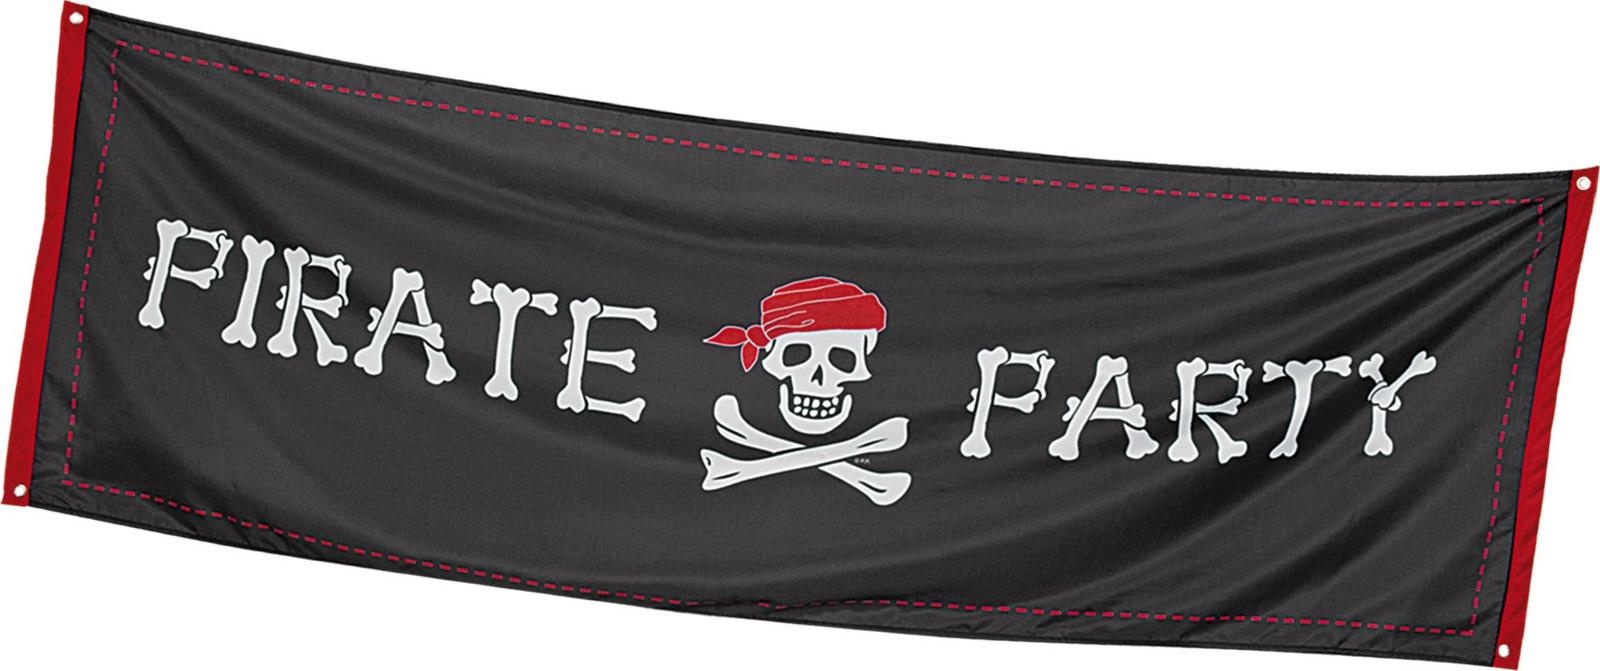 Banner pirate party cm 220x74